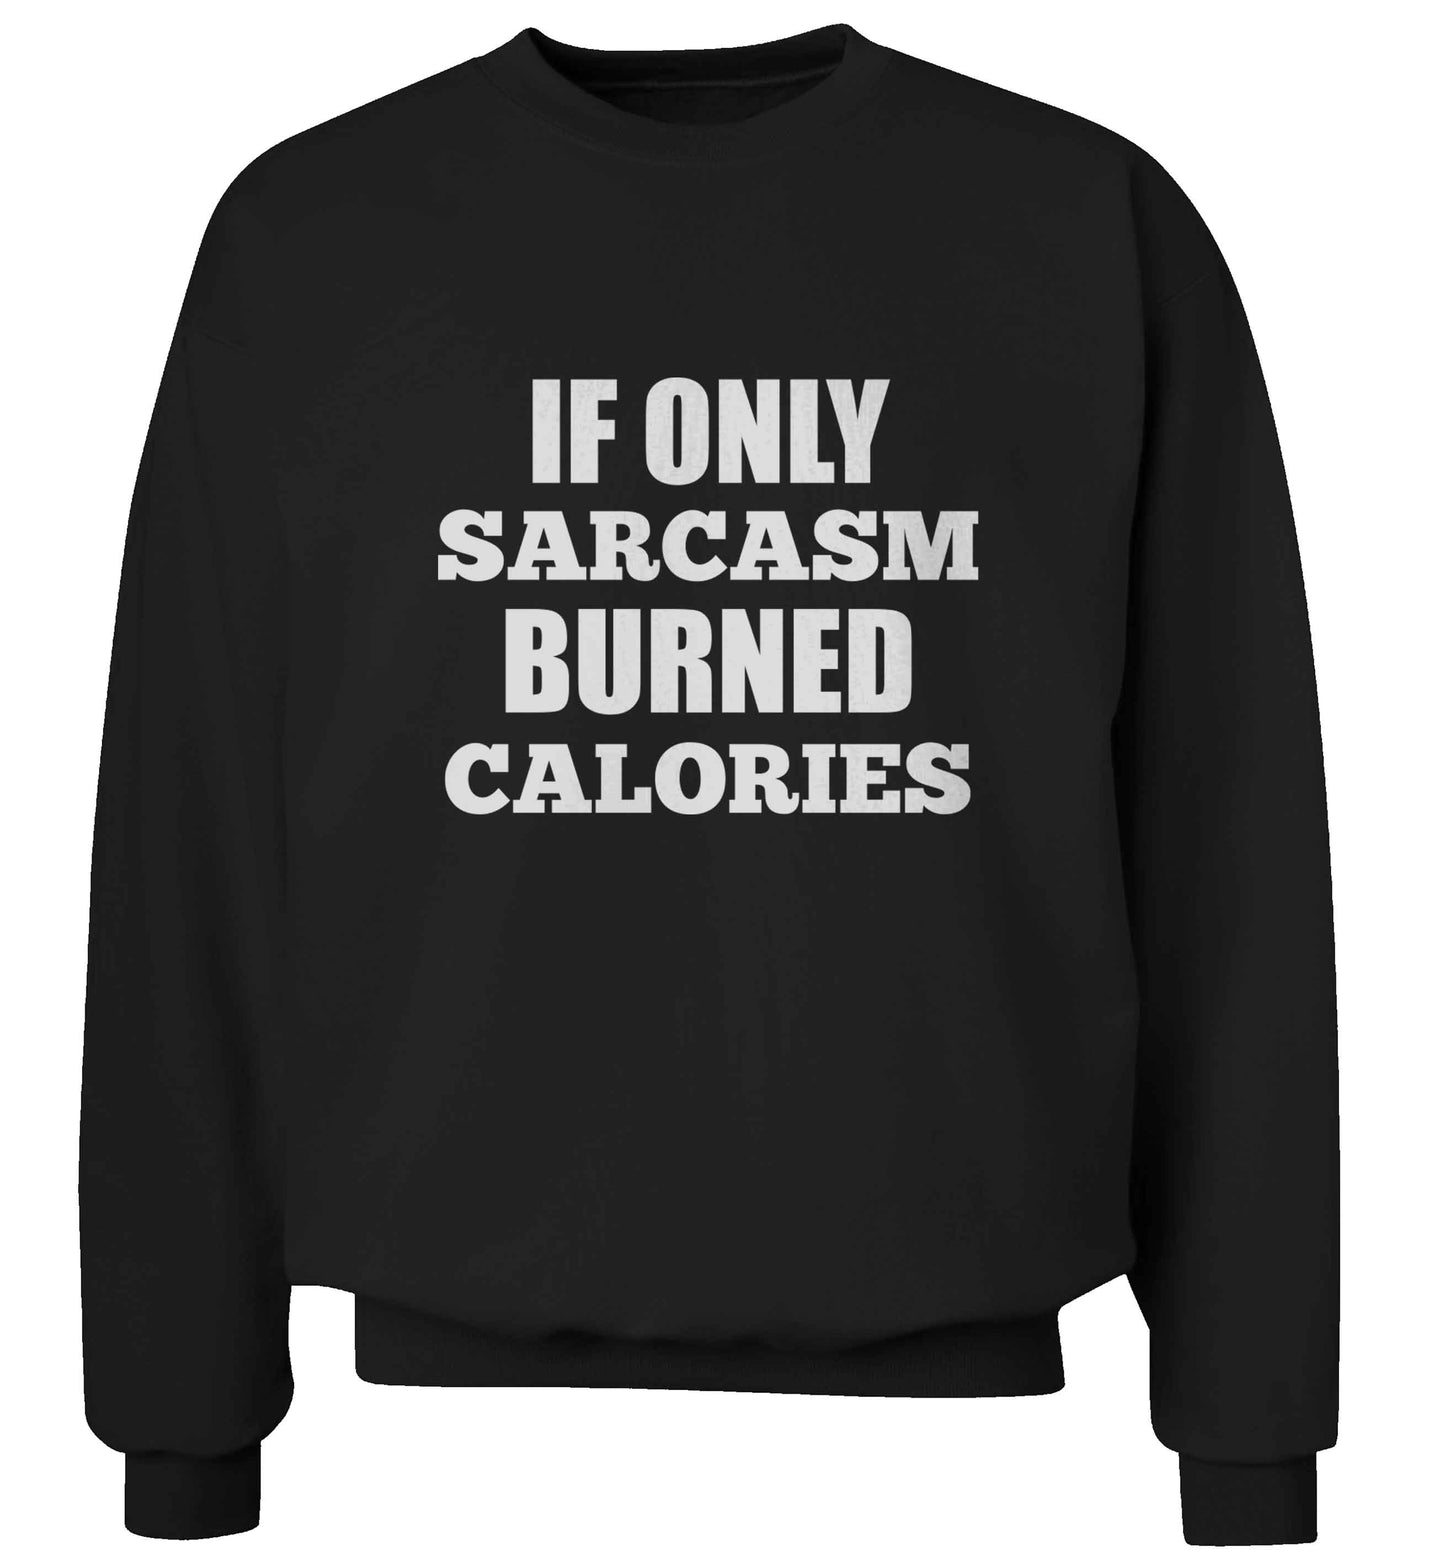 If only sarcasm burned calories adult's unisex black sweater 2XL